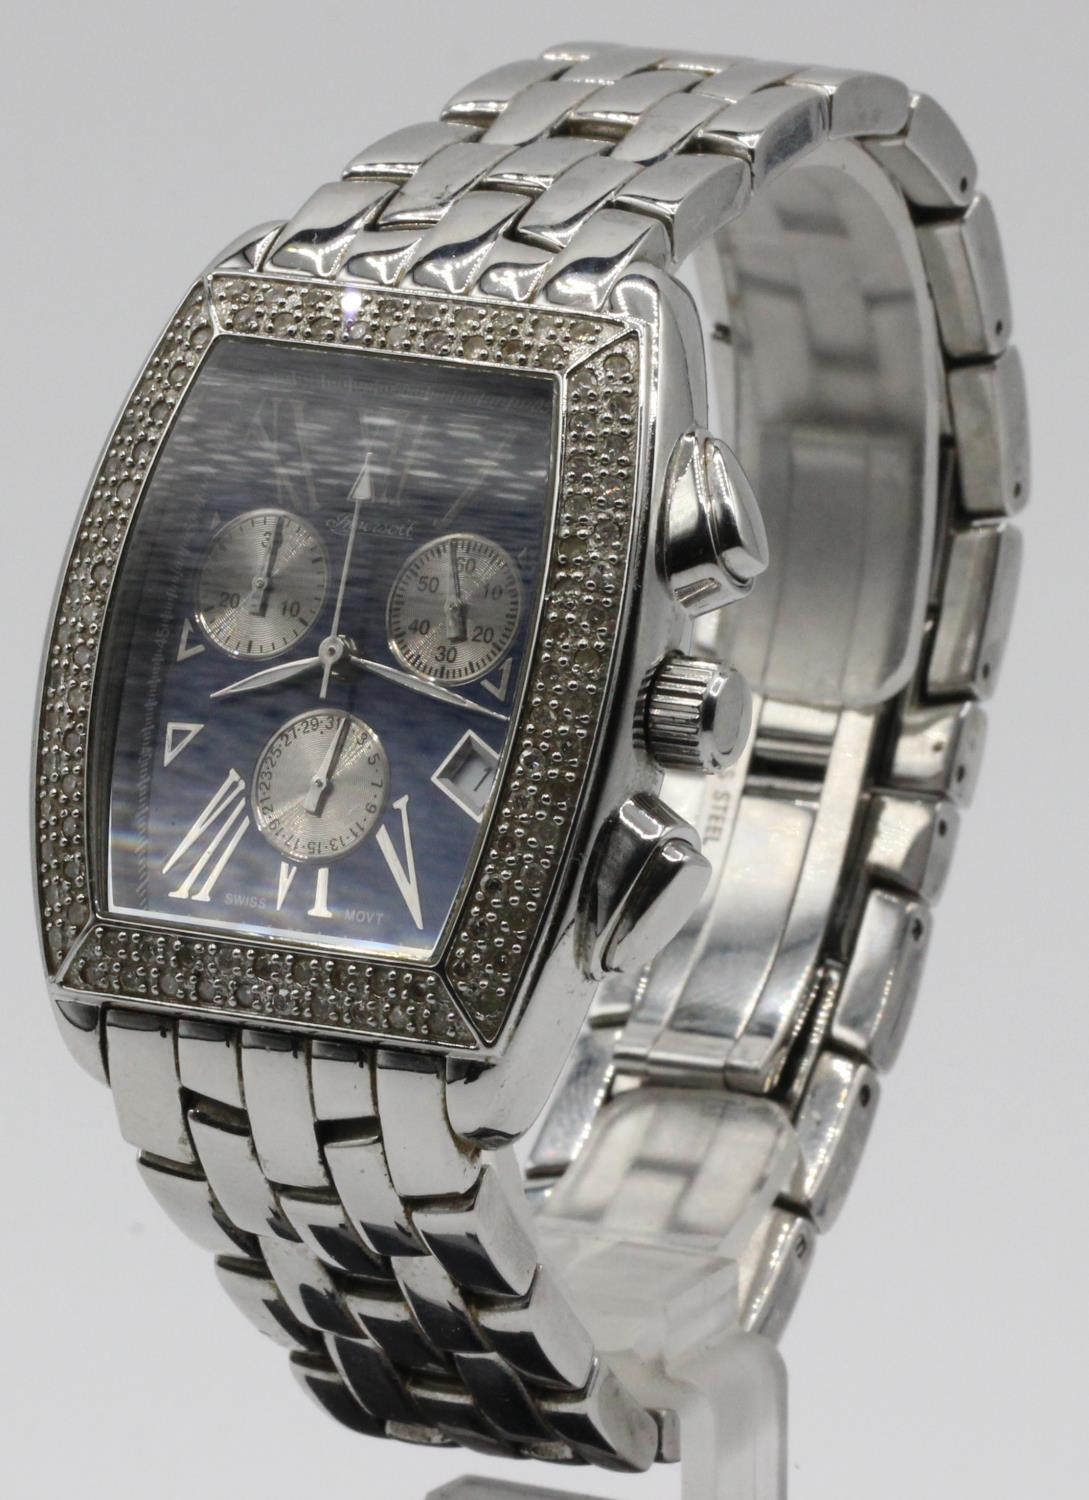 Ingersoll Gems Diamonds Stainless Steel Inc Box. IN34159 Serial Number 14292. All stainless steel. - Image 3 of 4